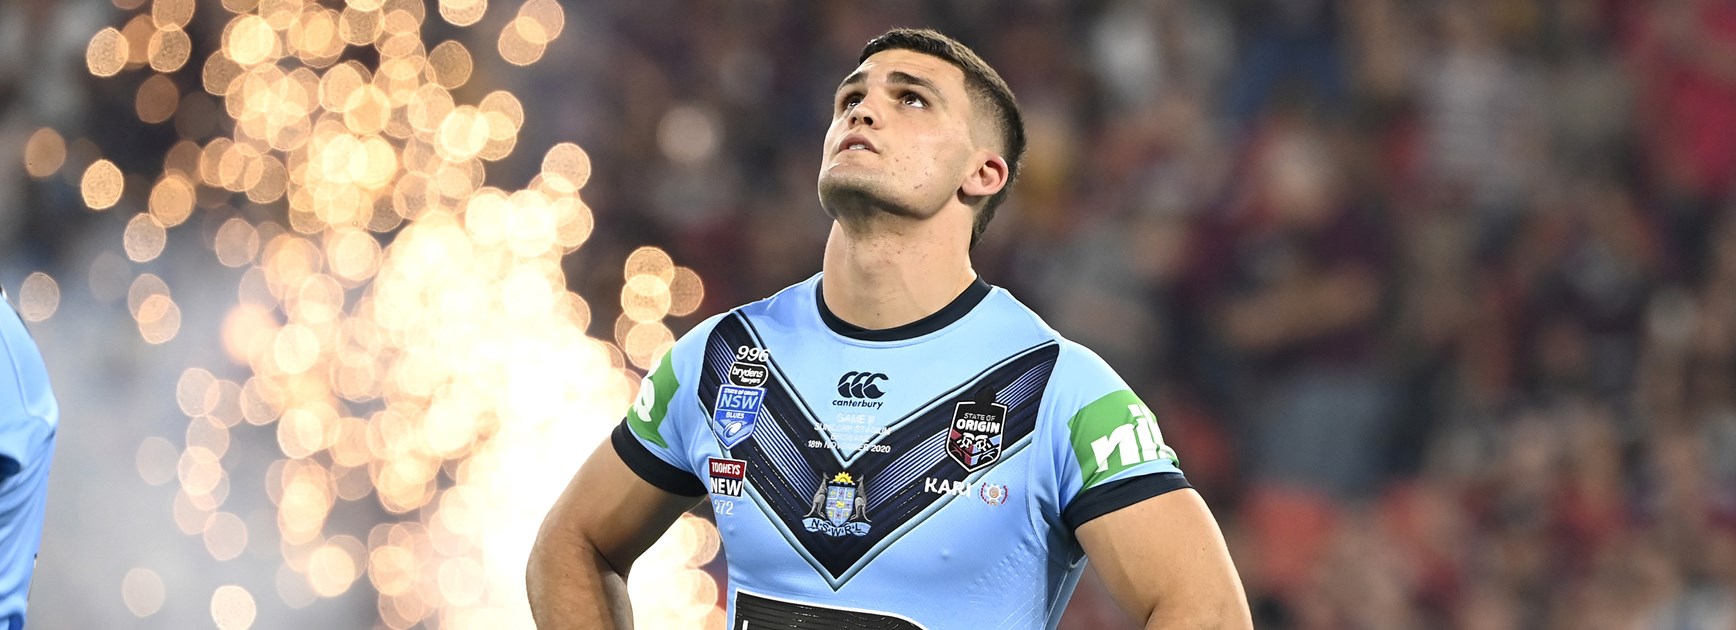 Fittler Medal winner Cleary to use near-misses as fuel for 2021